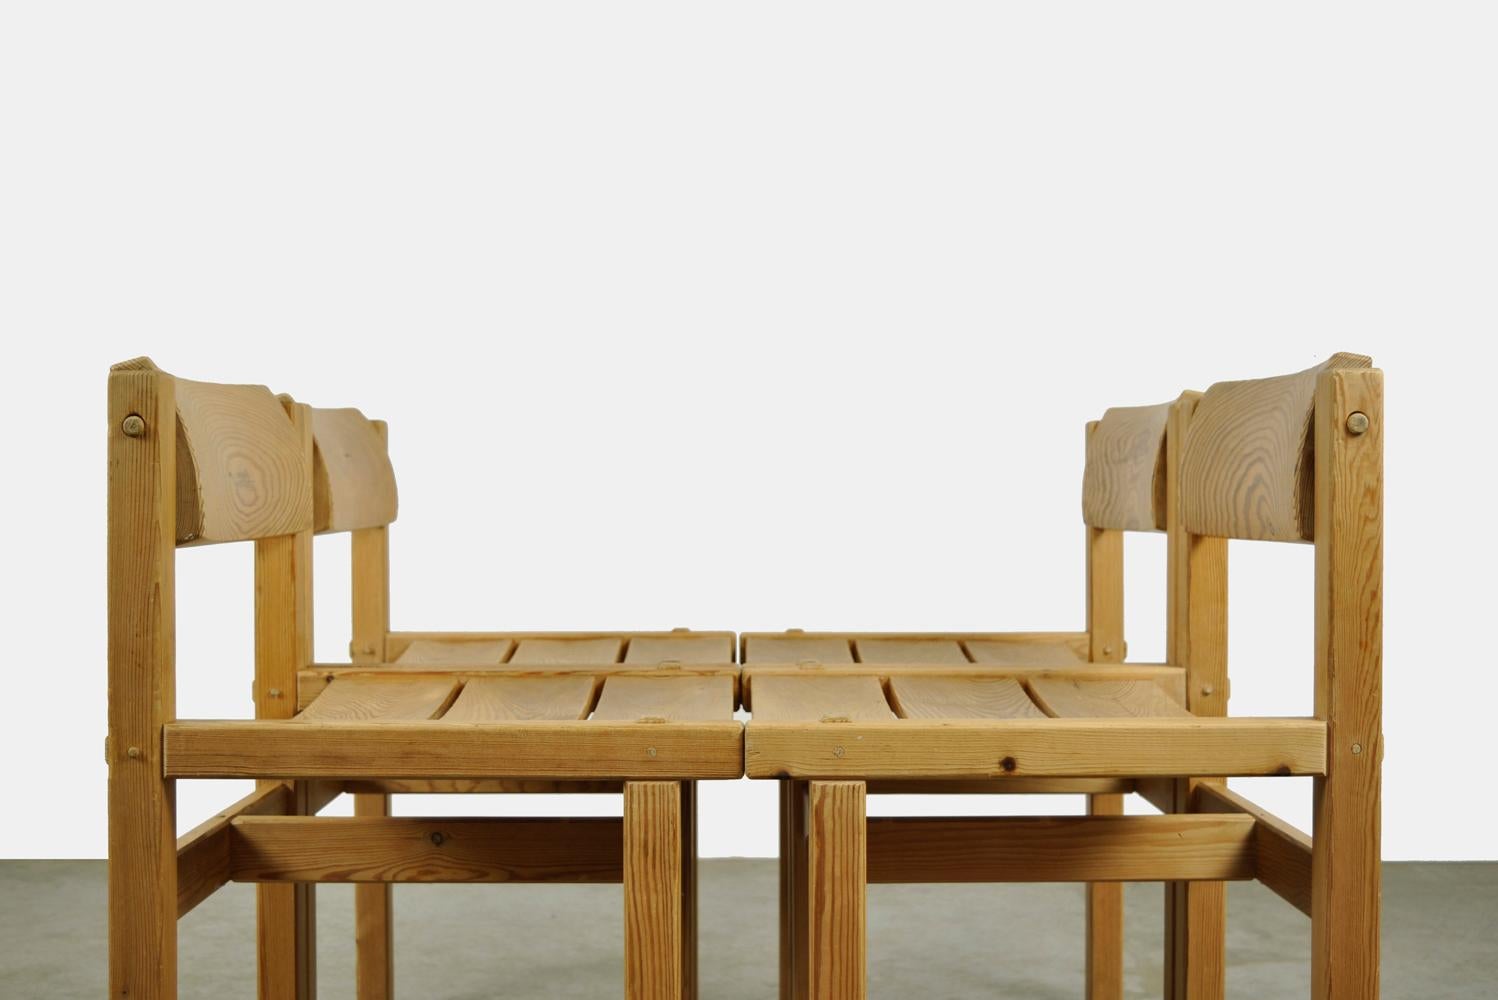 Trybo pine dining chairs (4) by Edvin Helseth for Stange Bruk, Norway 1960s For Sale 1